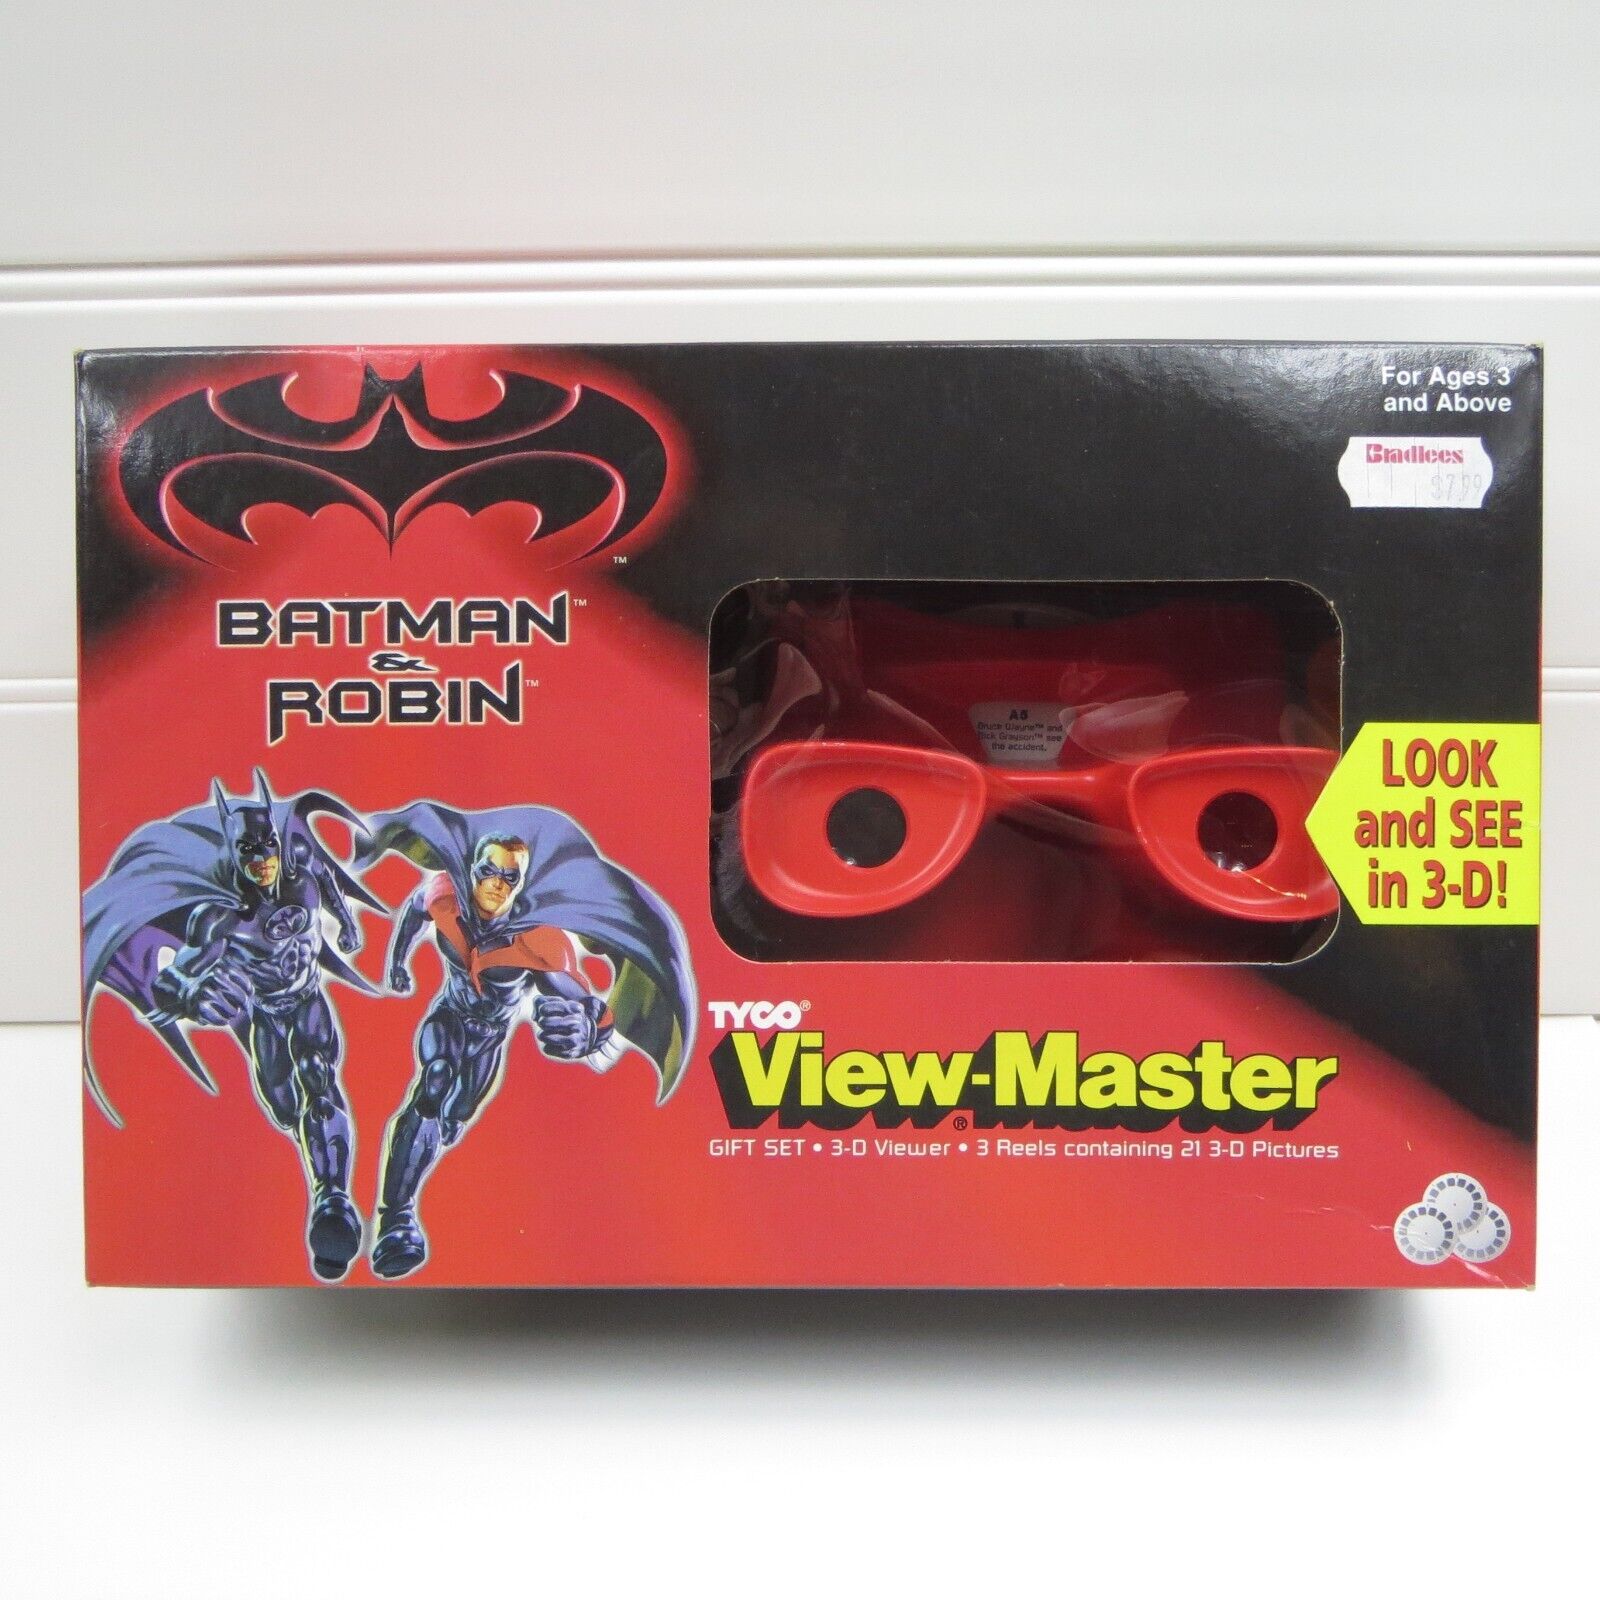 BATMAN & ROBIN - VINTAGE 1997 TYCO VIEWMASTER 3D GIFT SET - SEALED